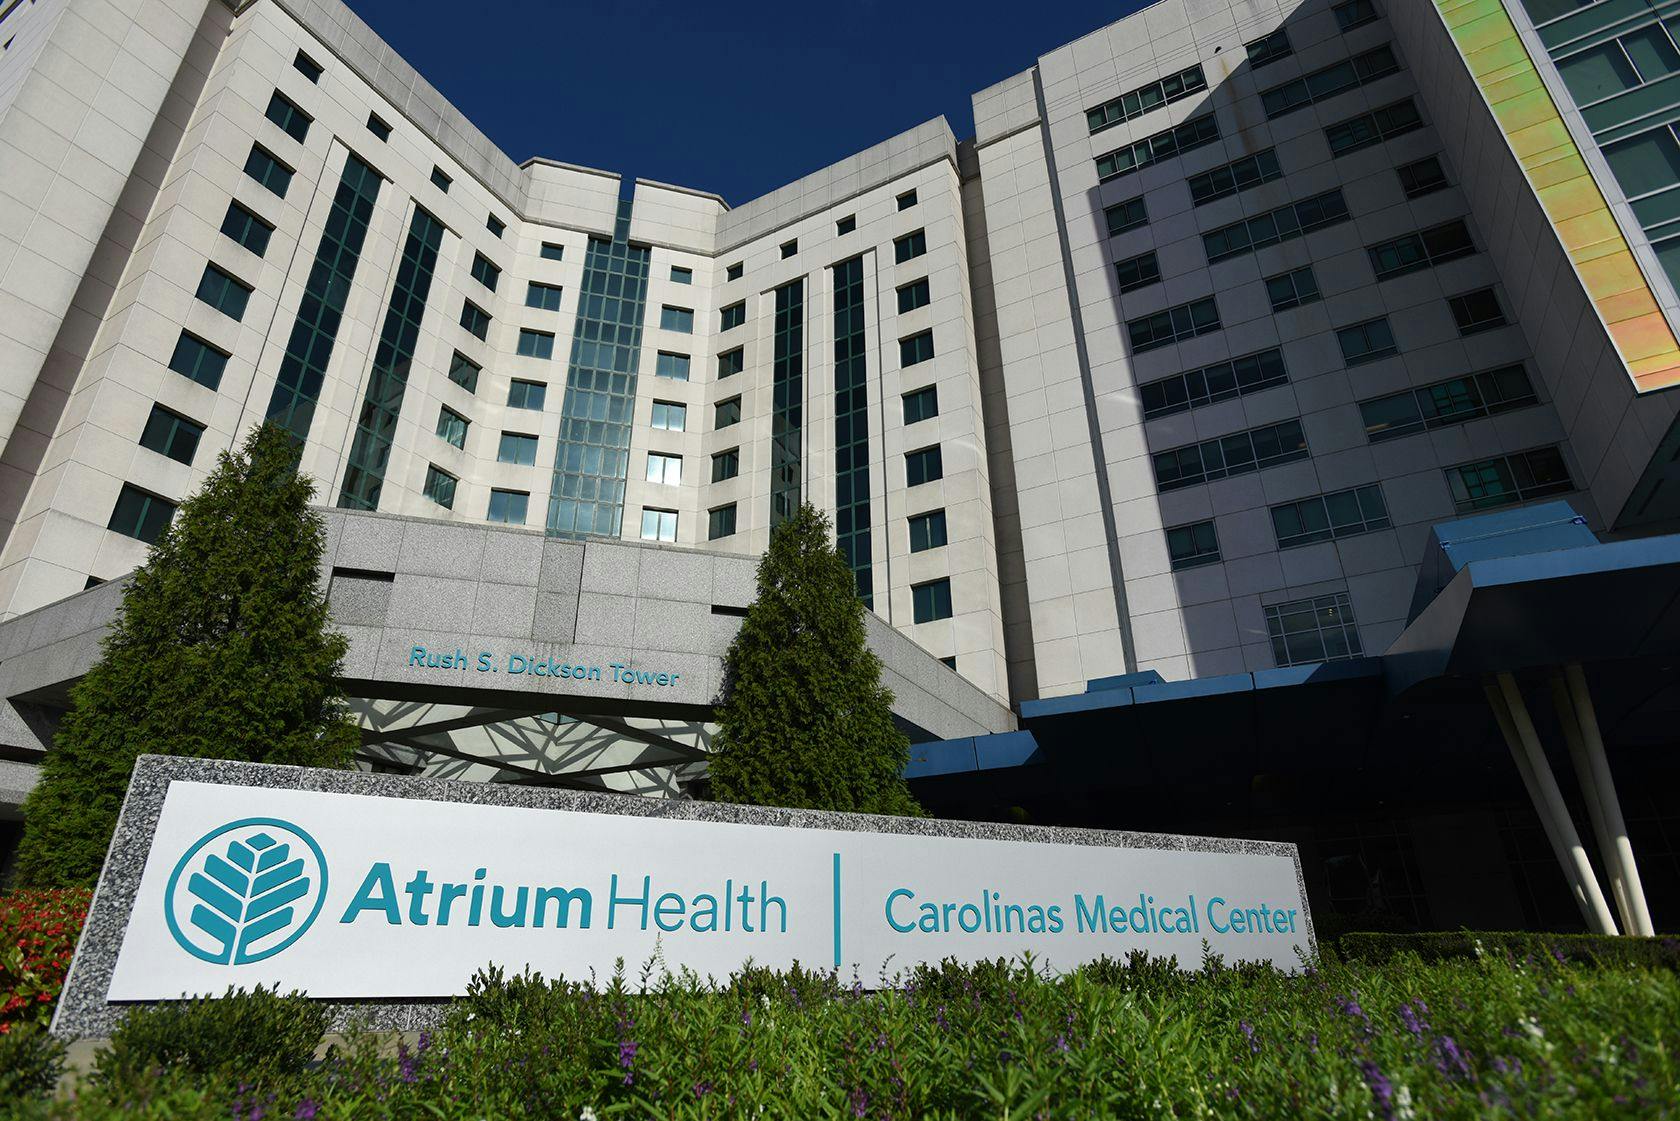 Atrium Health and Advocate Aurora Health say they have completed their merger. The new system will be known as Advocate Health and will operate 67 hospitals in six states, and it has a combined $27 billion in annual revenue.